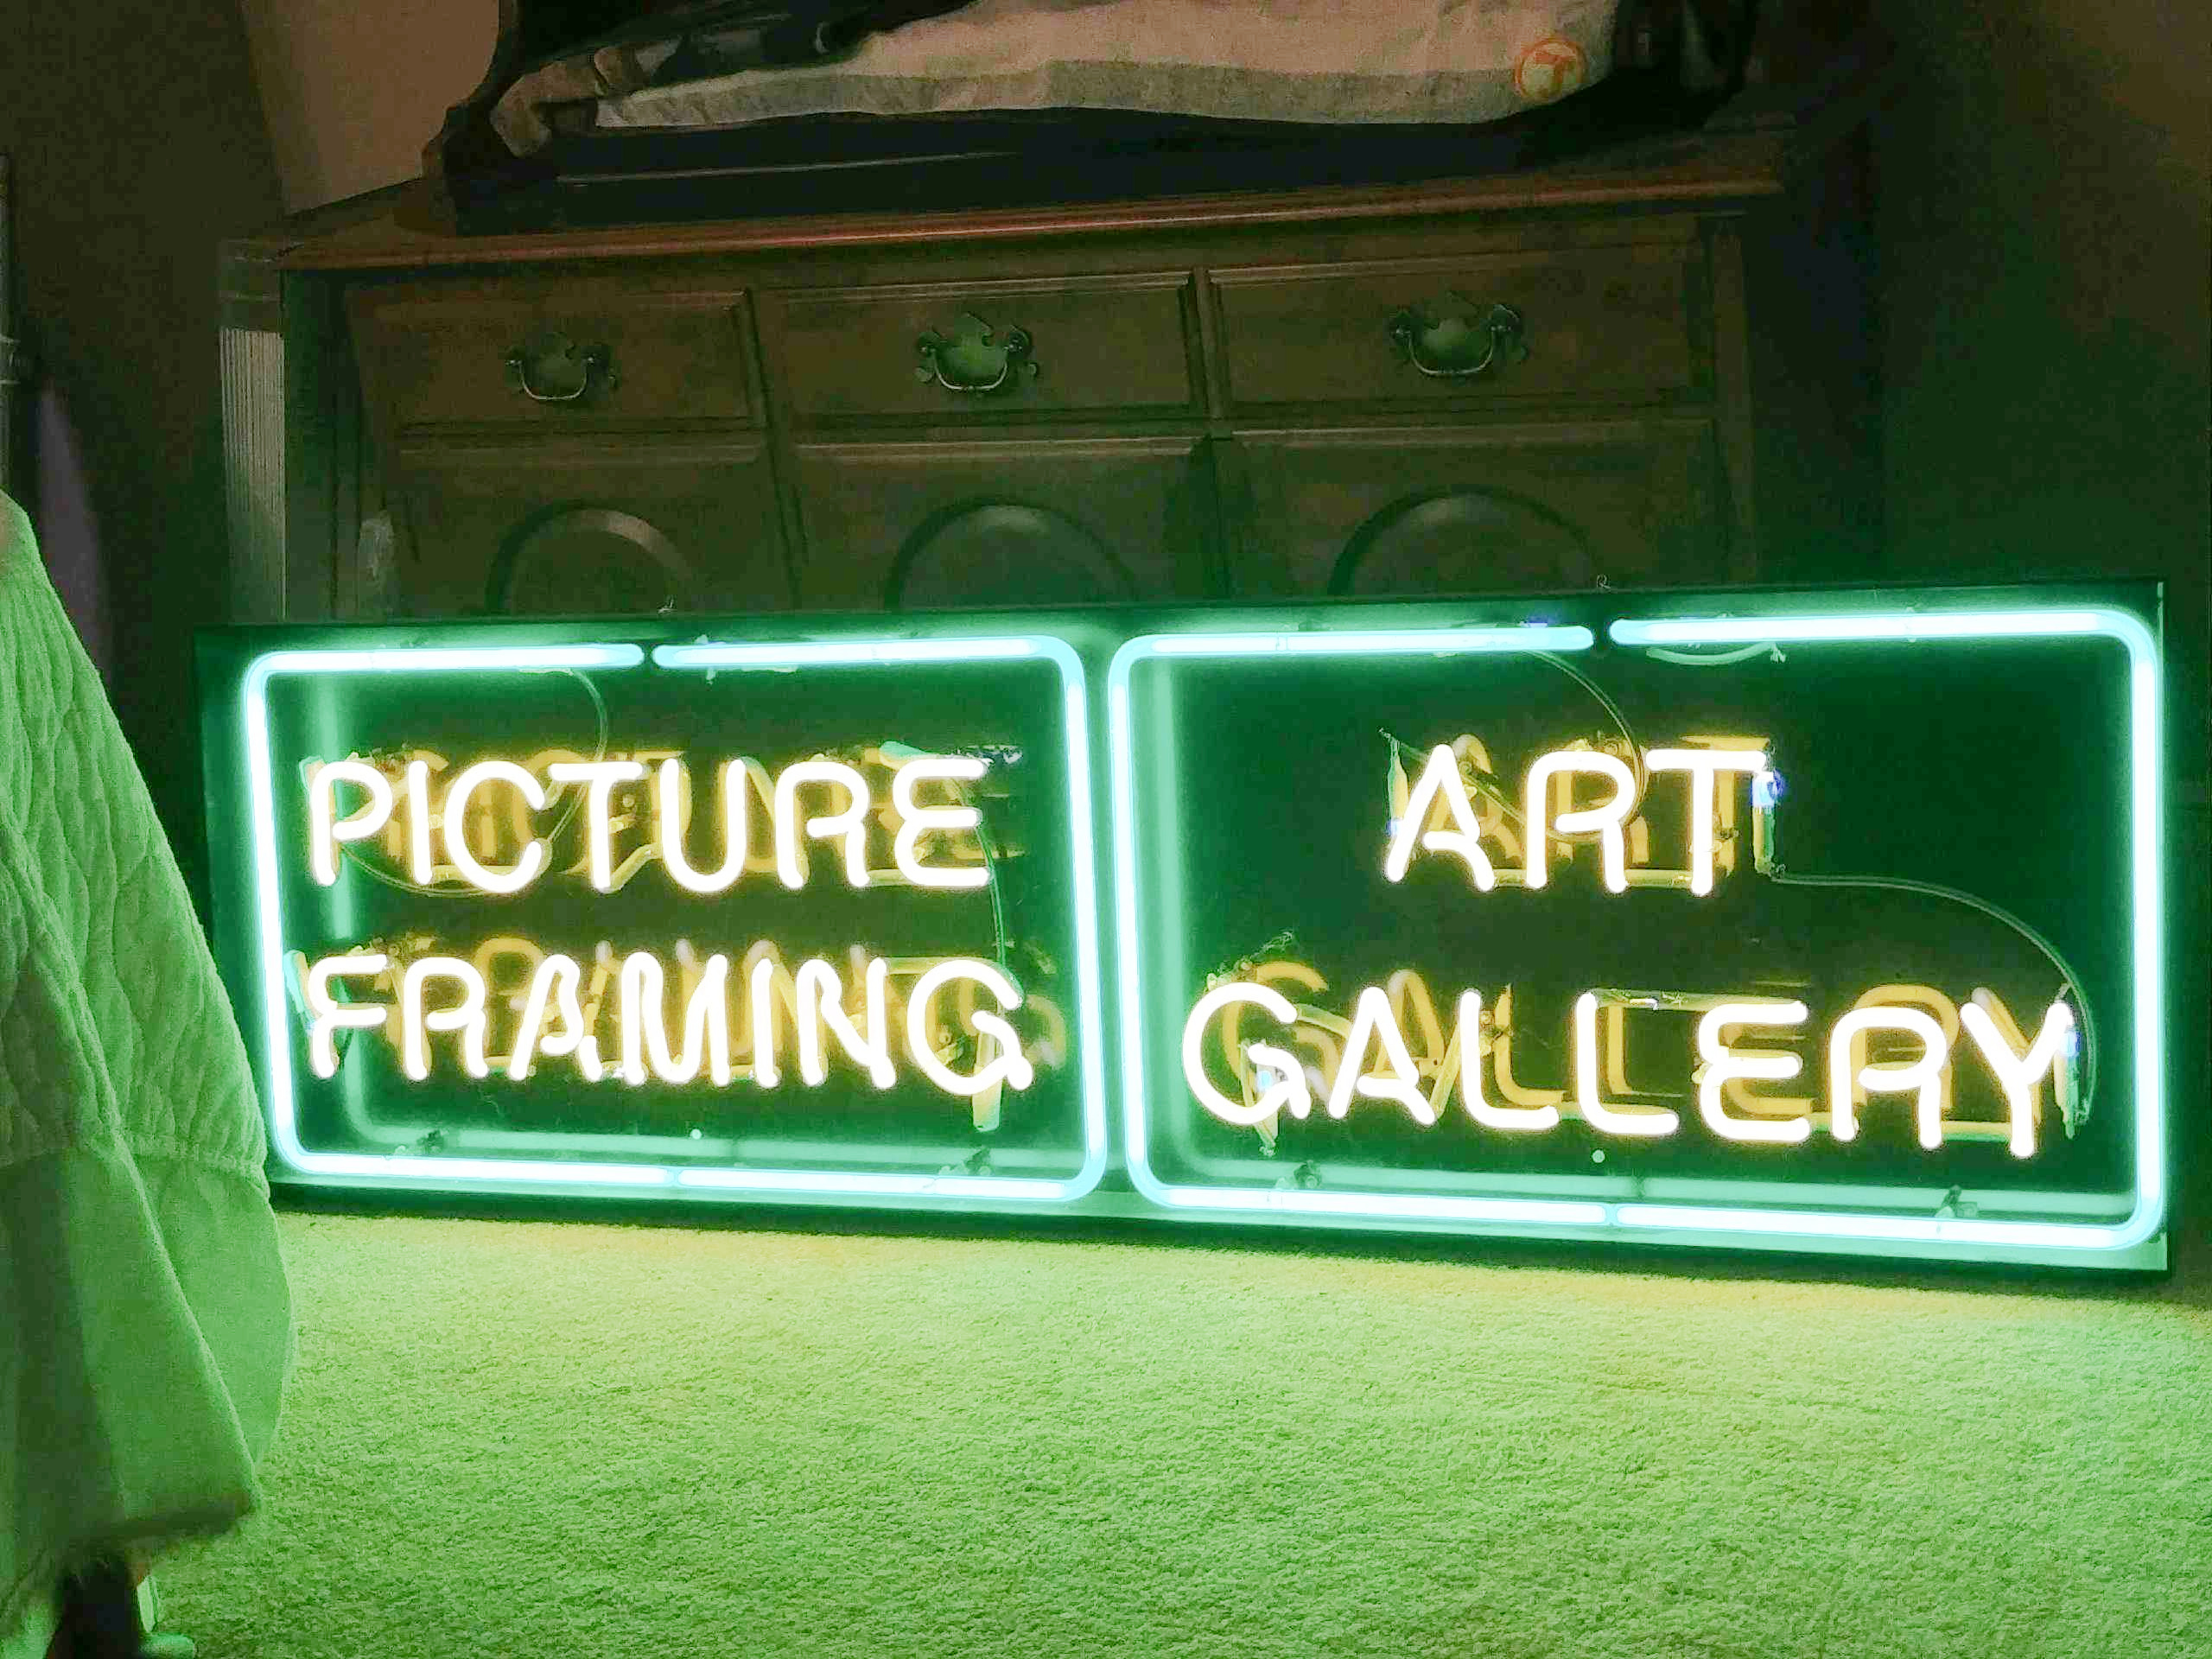 Picture Framing / Art Gallery Neon Sign (used) Item # UE-011422A (Kansas)